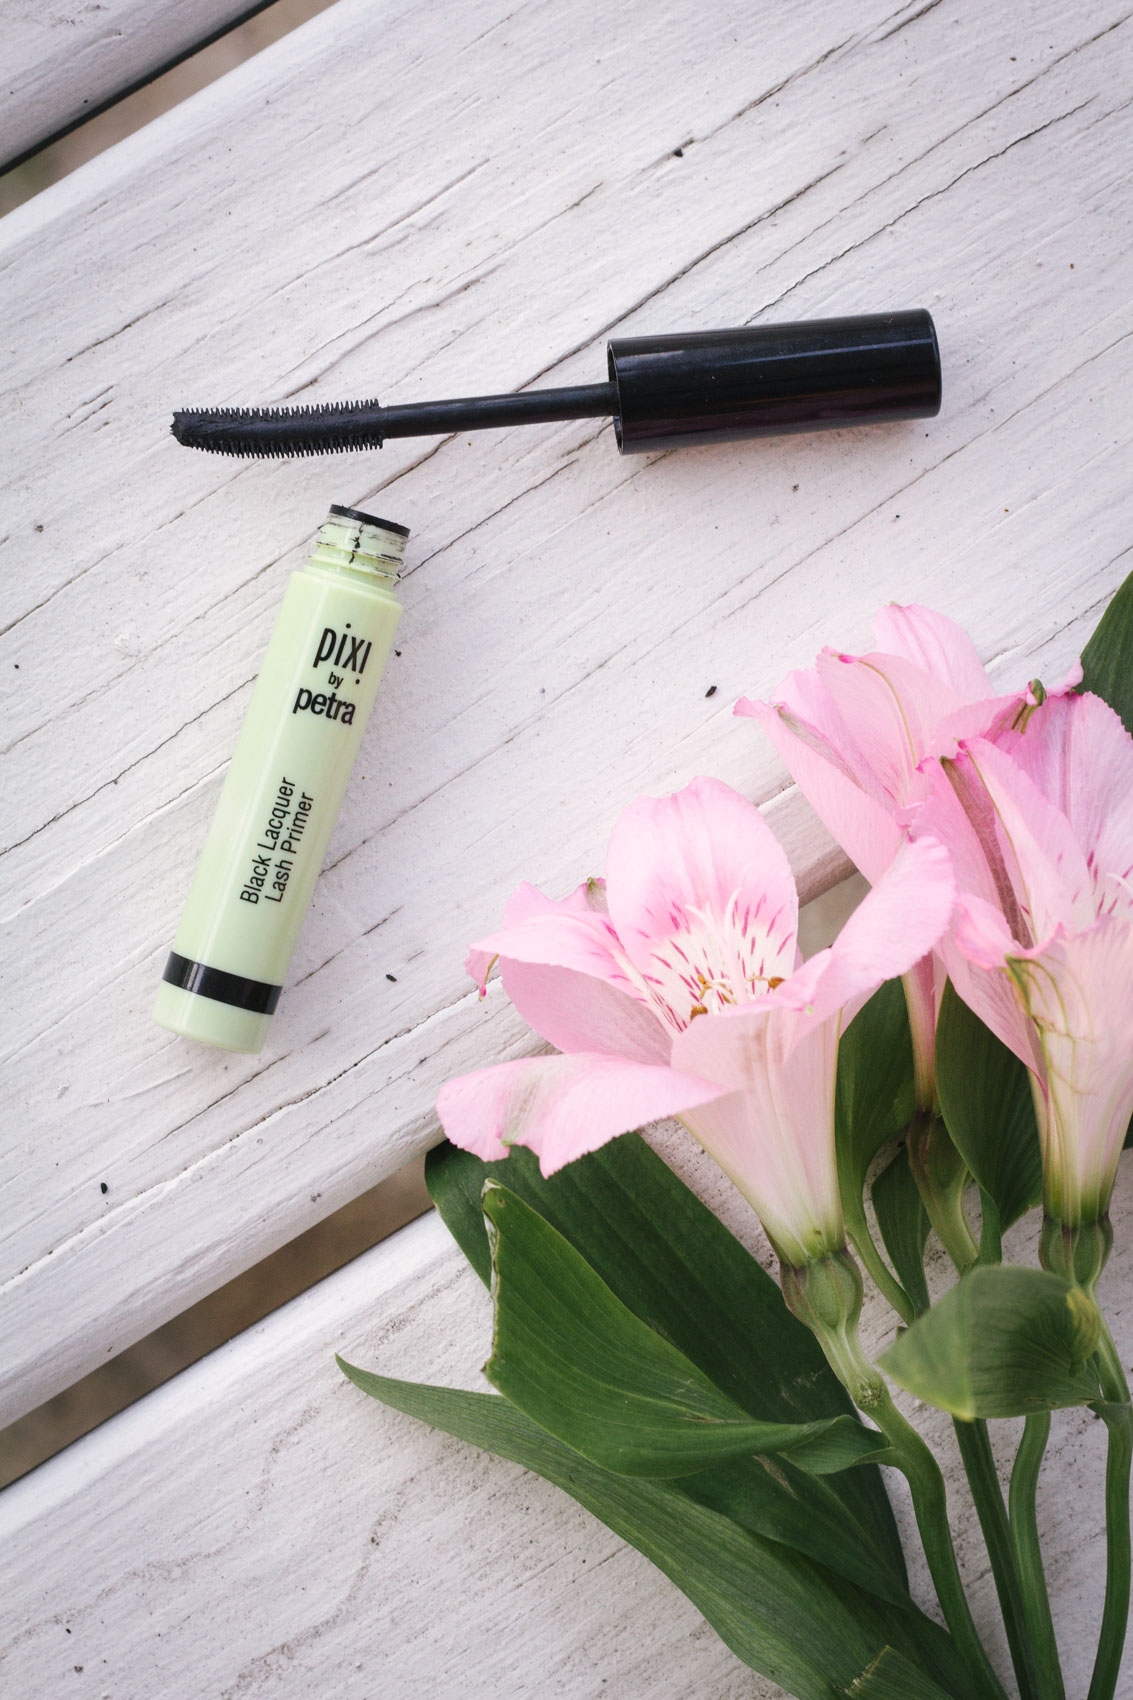 Black Lacquer Lash Primer - Seriously, where has this been all my life?! These small, but mighty bristles define, lengthen, and prep your lashes for flawless mascara application.